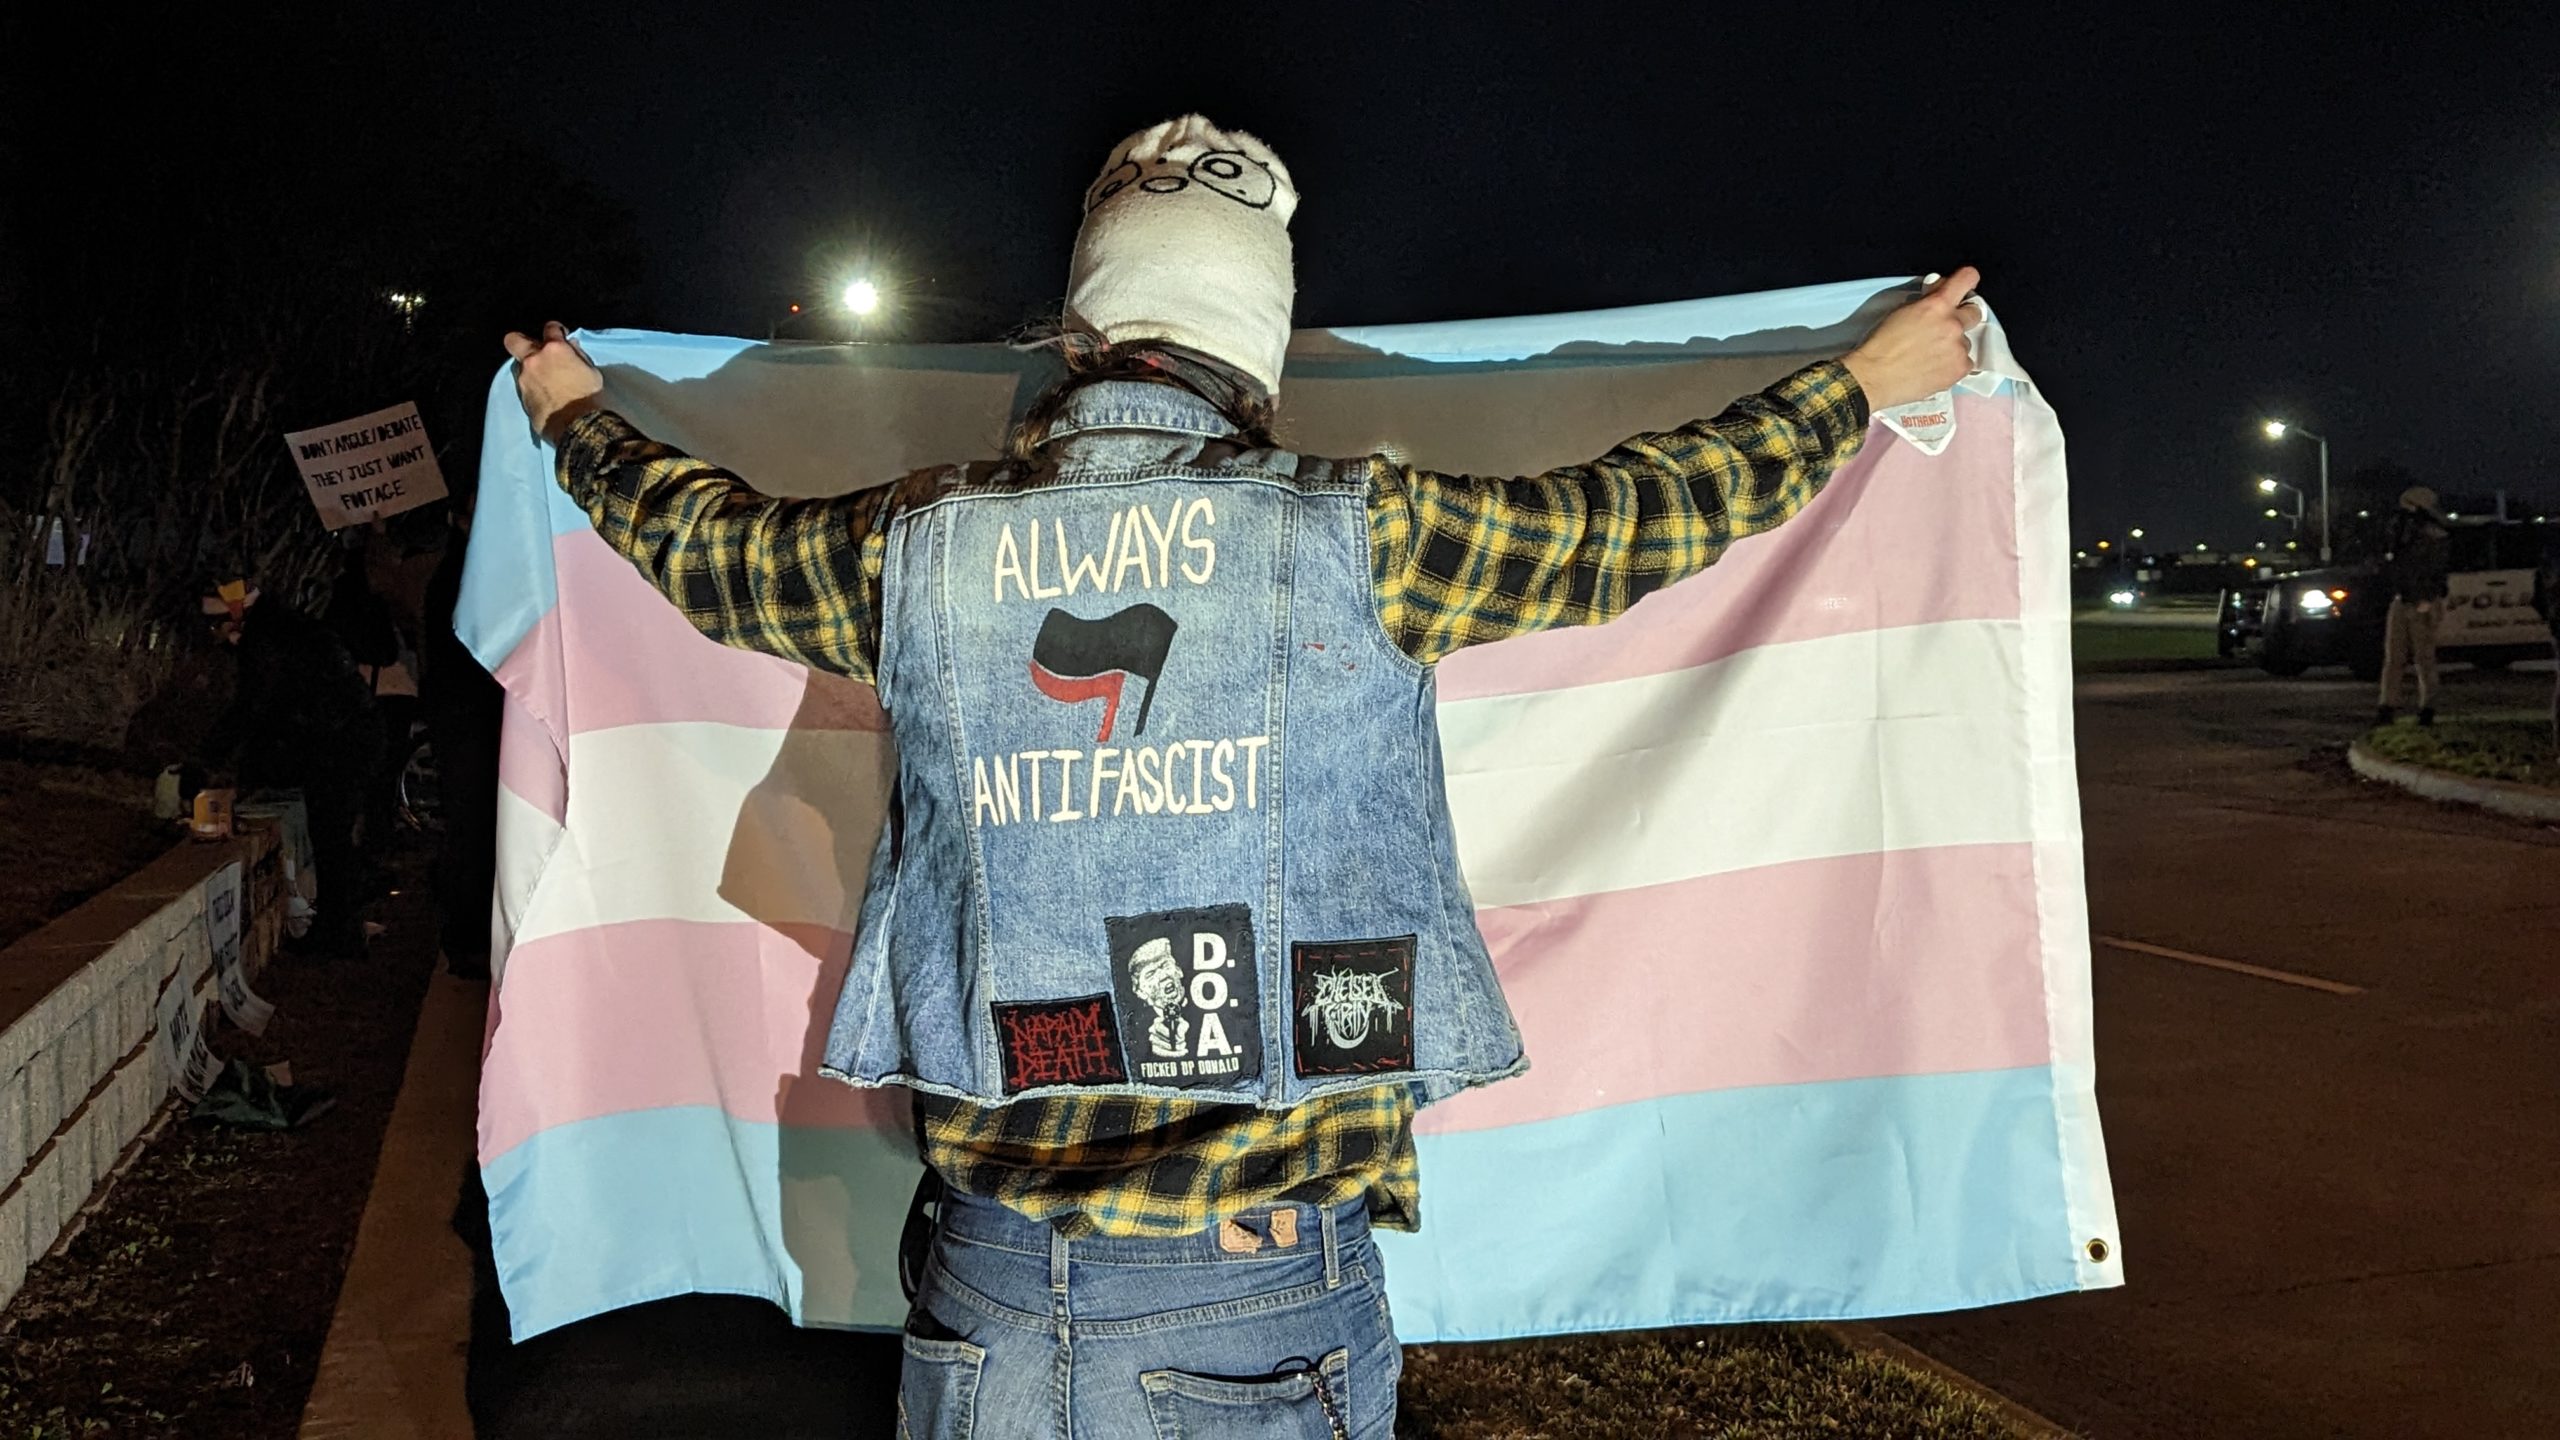 At a protest outside a Christmas-themed drag show in Grand Prairie Texas, an activist holds a trans pride flag, wearing a denim jacket decorated with several patches including an Always Antifascist back patch which includes the red and black antifascist flags.